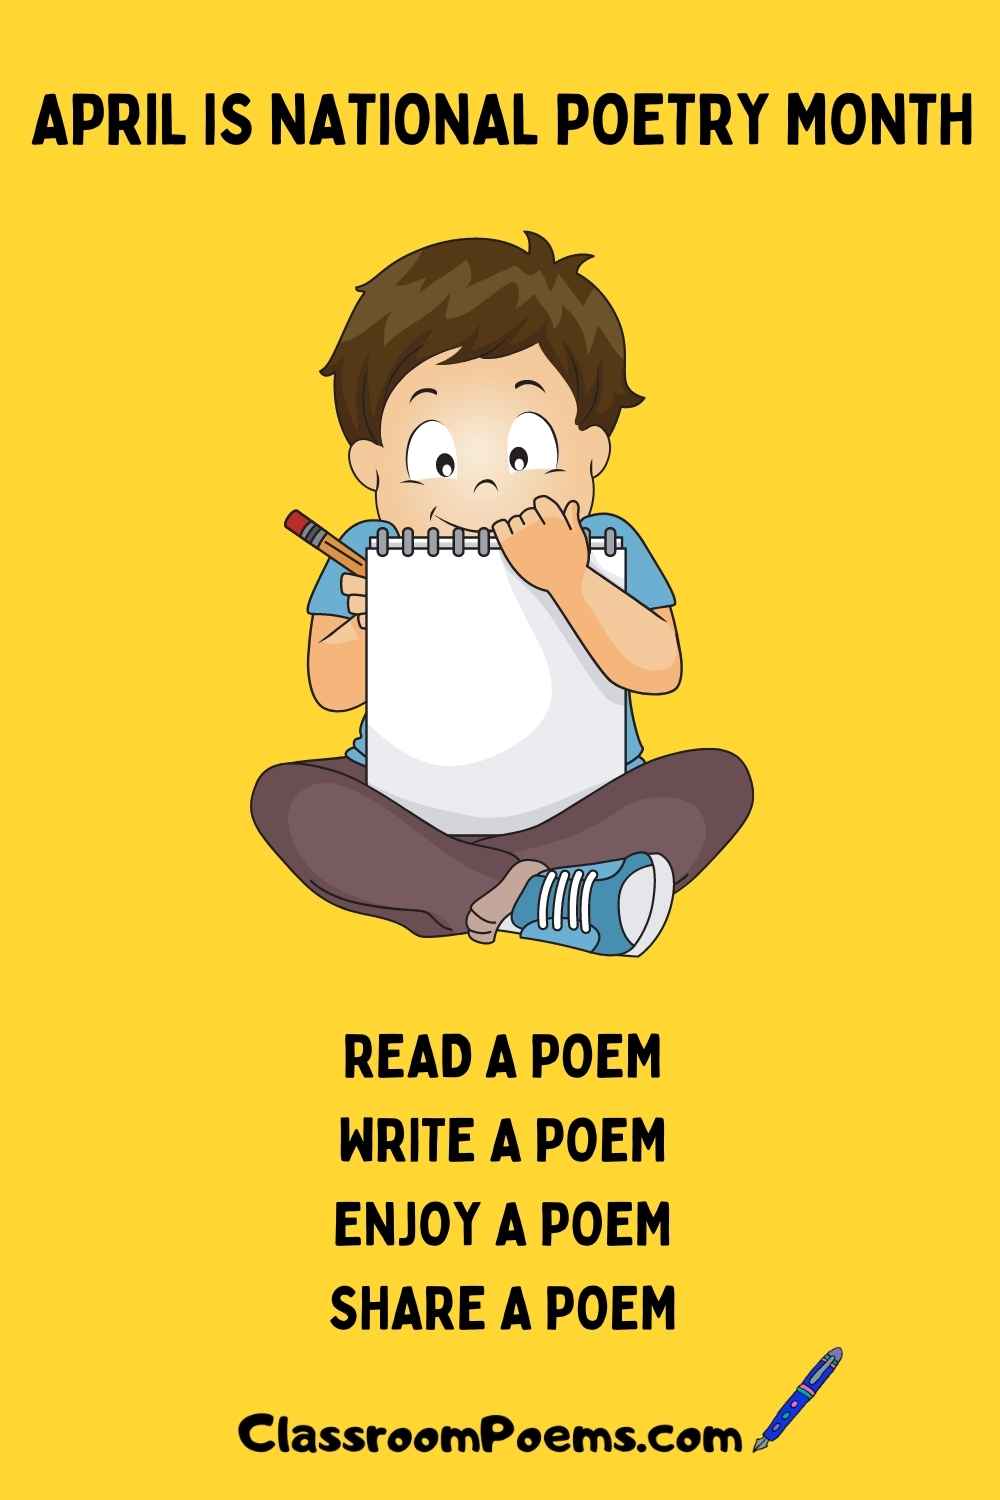 April is Poetry Month, Write a poem for poetry month, national poetry month, classroompoems.com